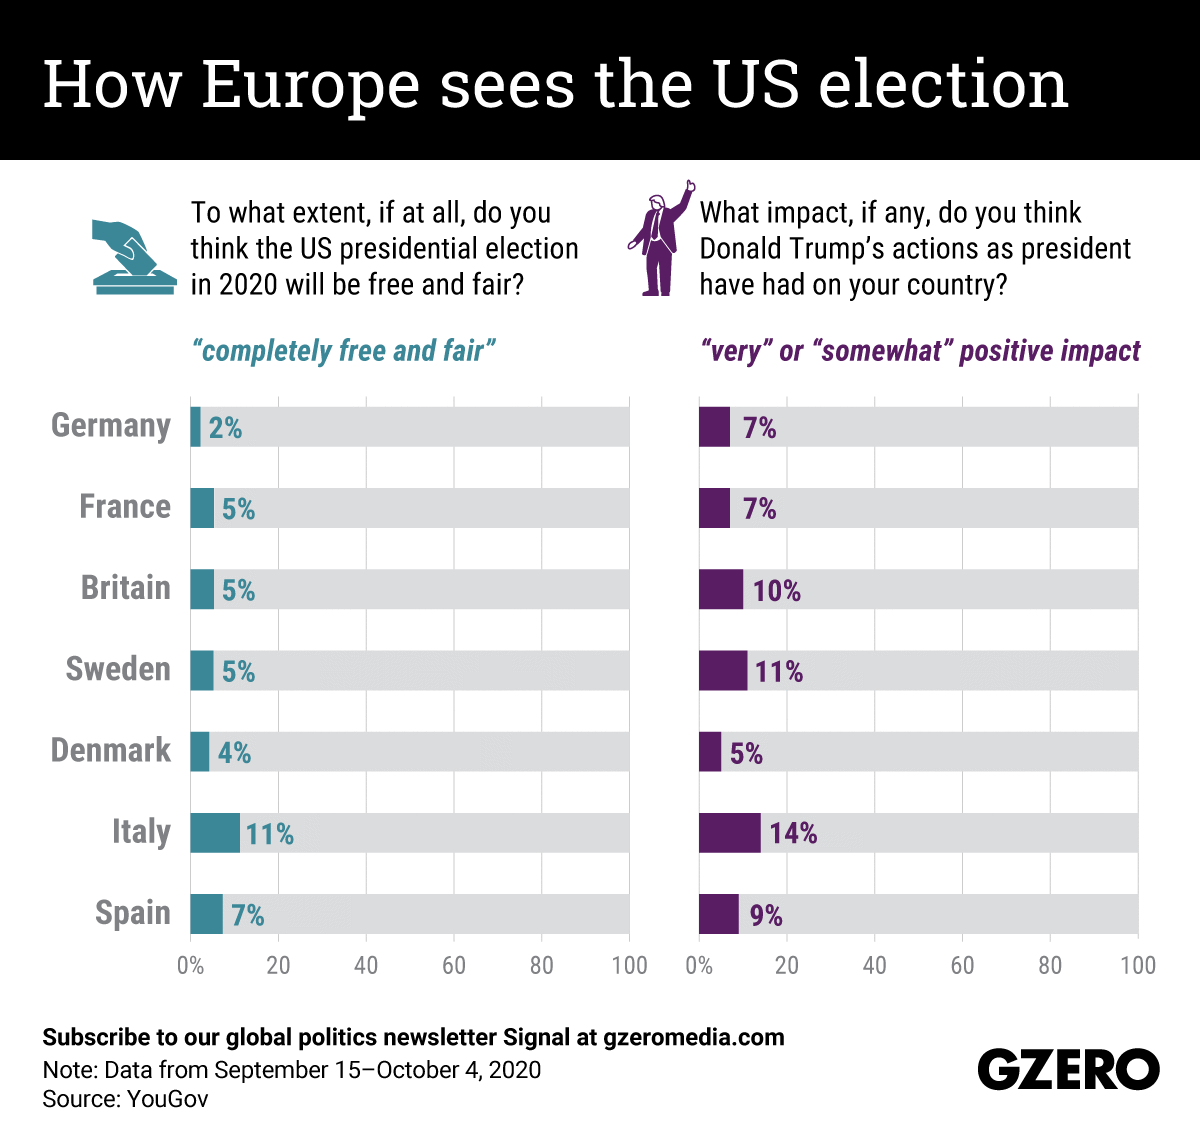 The Graphic Truth: How Europe sees the US election